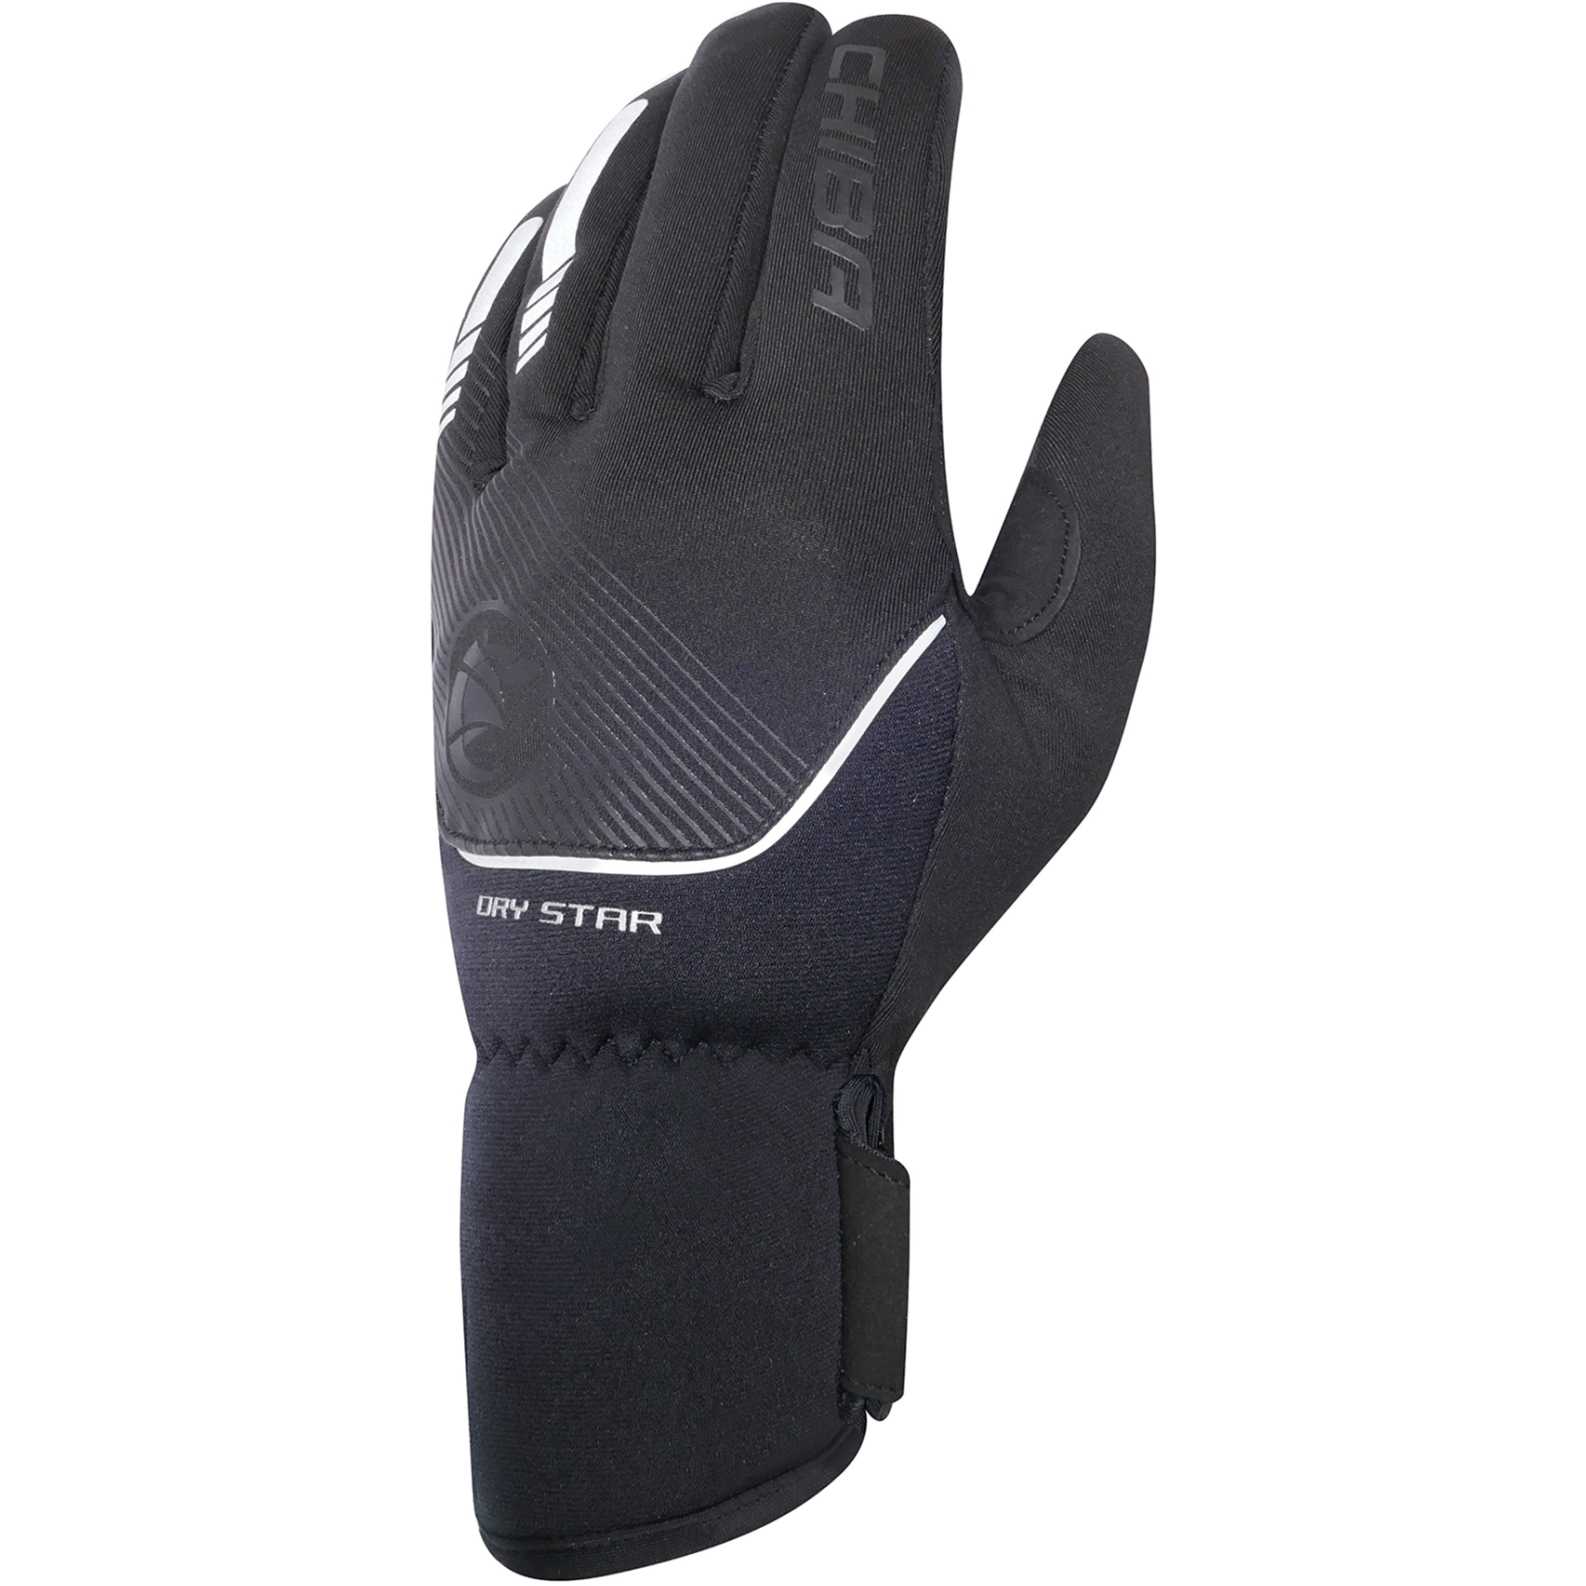 Image of Chiba Dry Star Warm Cycling Gloves - black